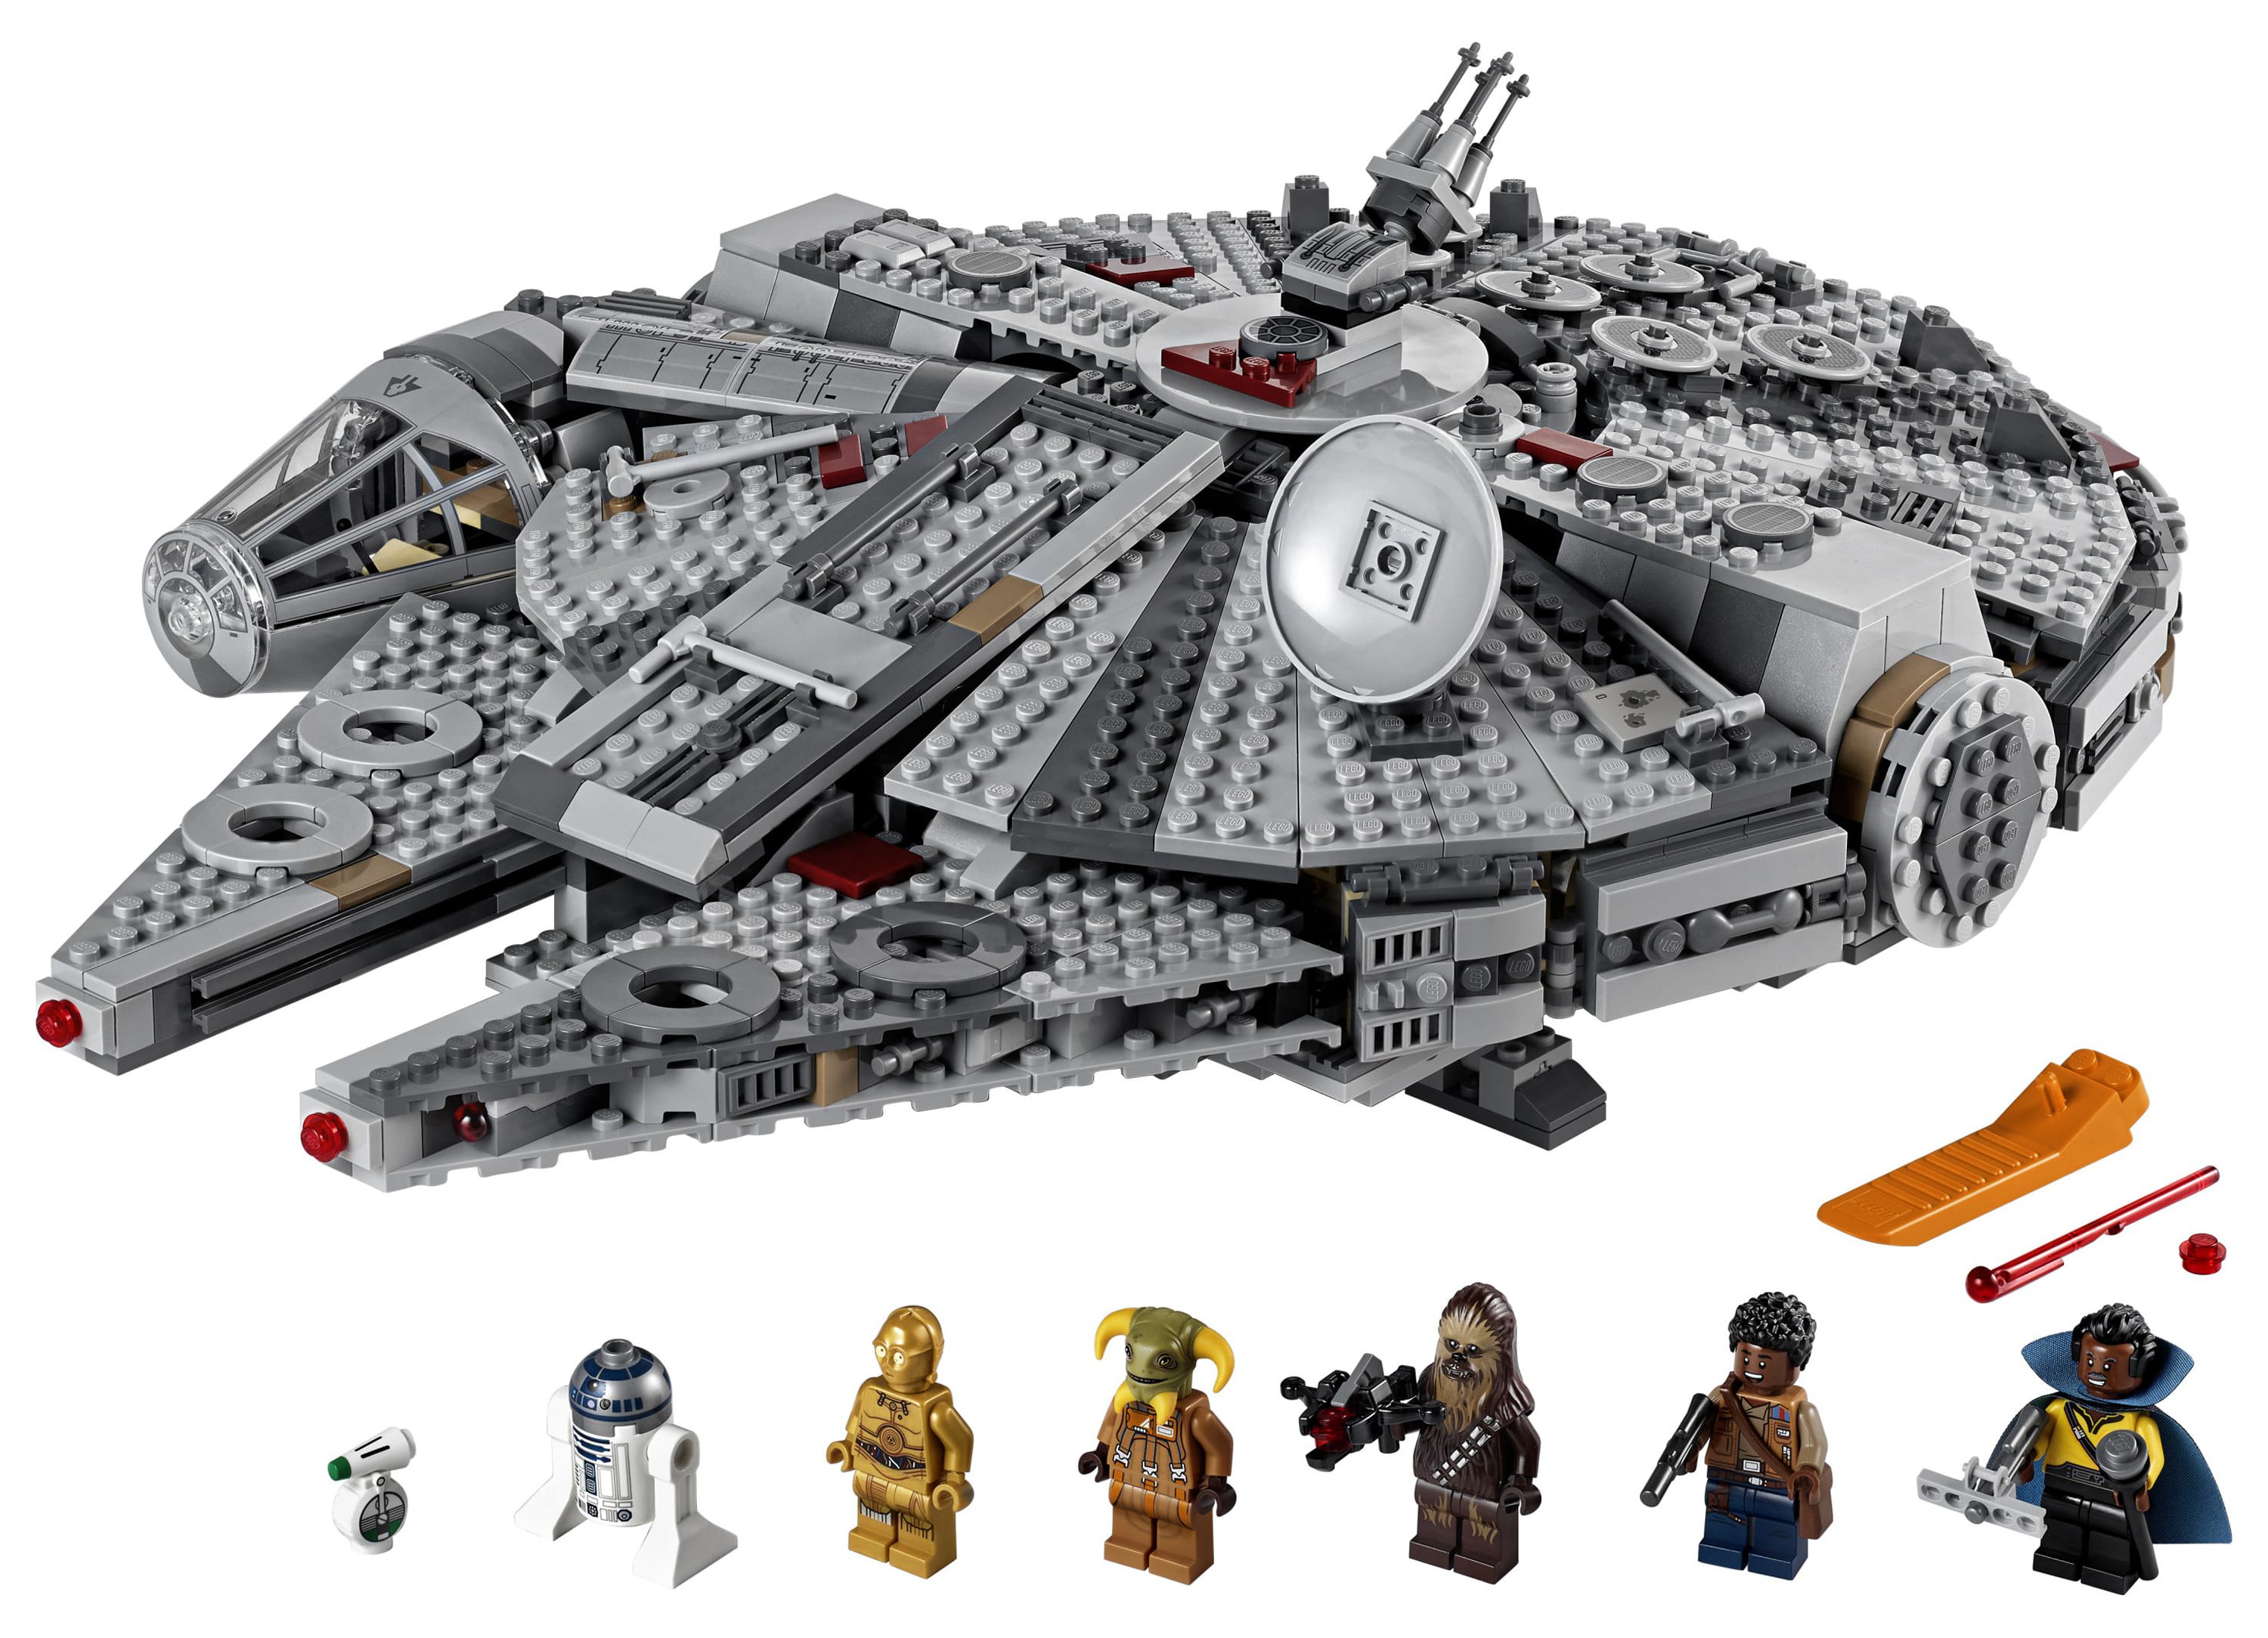 LEGO Star Wars Millennium Falcon 75257 Building Set - Starship Model with Finn, Chewbacca, Lando Calrissian, Boolio, C-3PO, R2-D2, and D-O Minifigures, The Rise of Skywalker Movie Collection - image 5 of 9